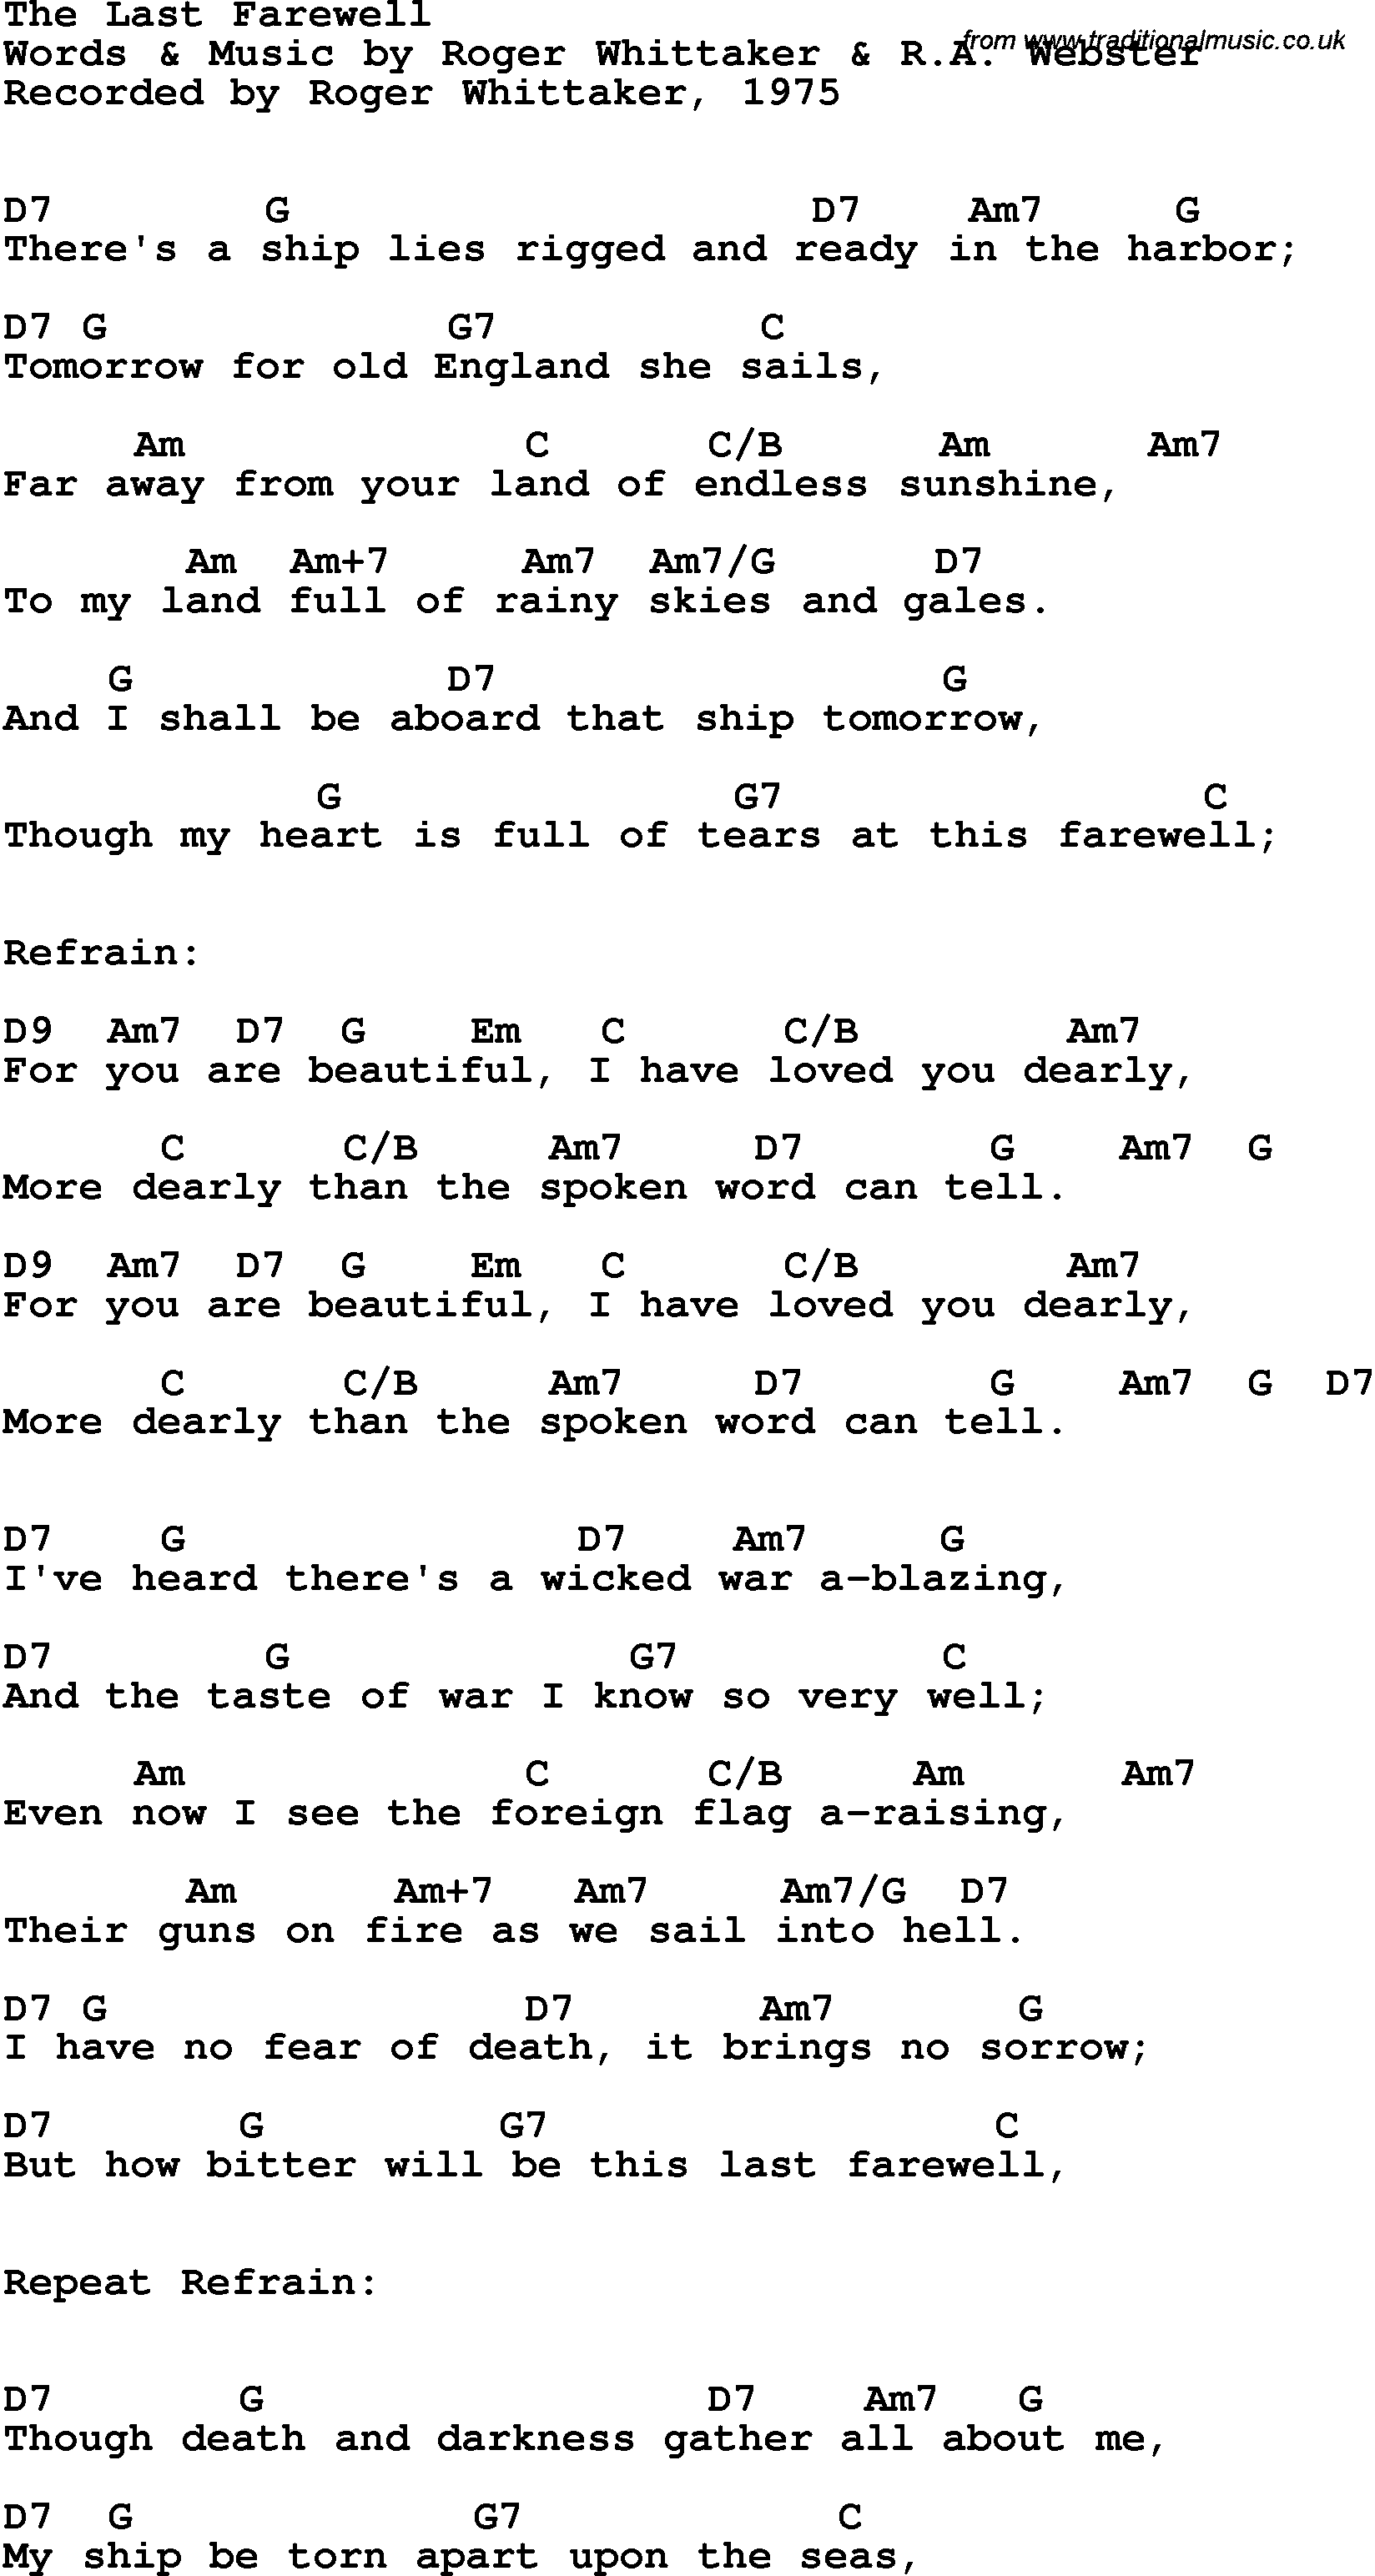 Song Lyrics with guitar chords for Last Farewell, The - Roger Whitaker, 1975